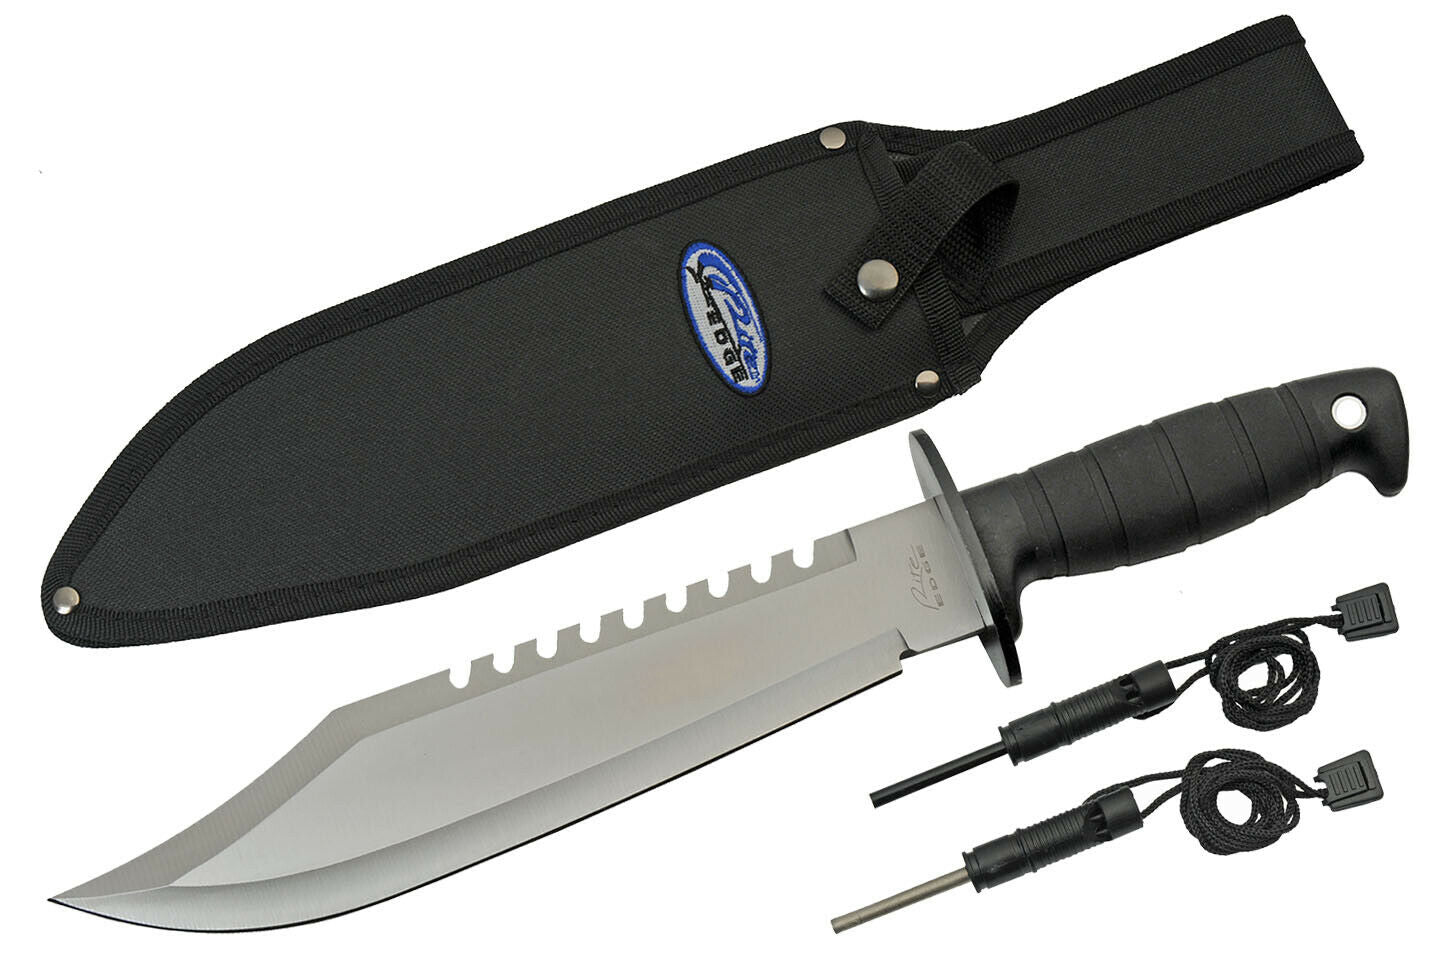 15" OUTDOOR SURVIVAL KNIFE